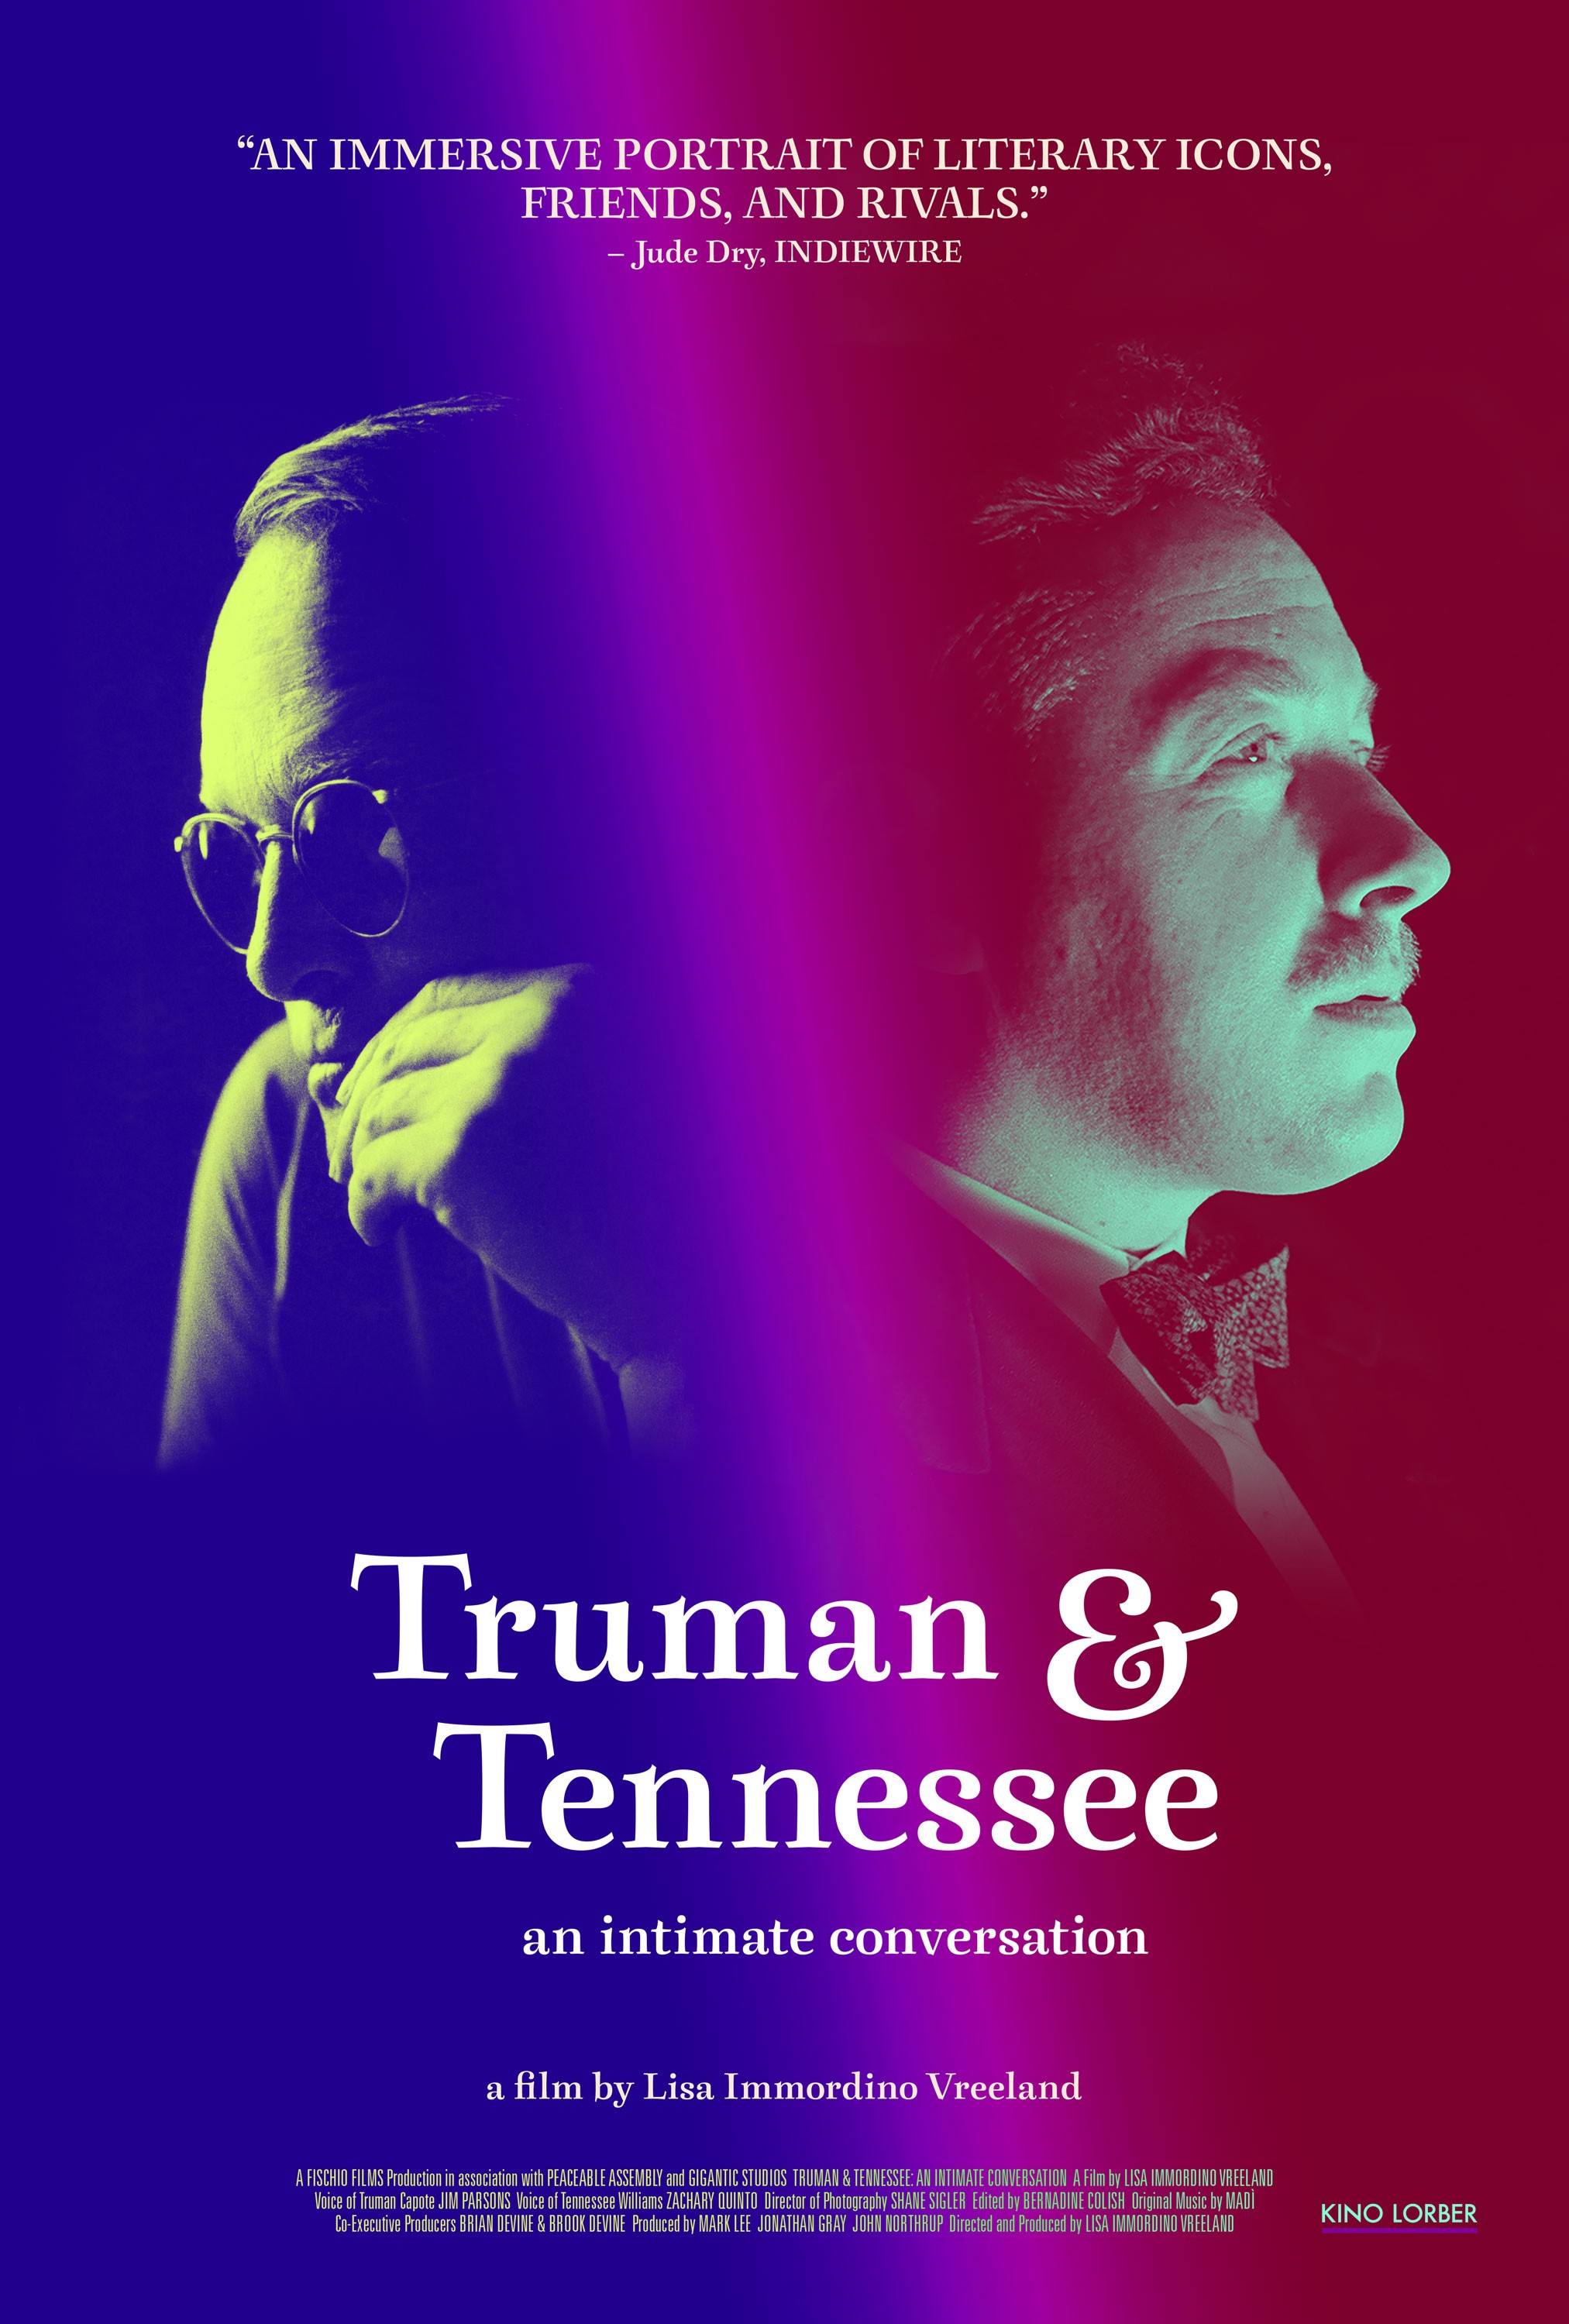 New Documentary Examines the Bond Between Literary Masters Truman Capote  and Tennessee Williams - OutSmart Magazine